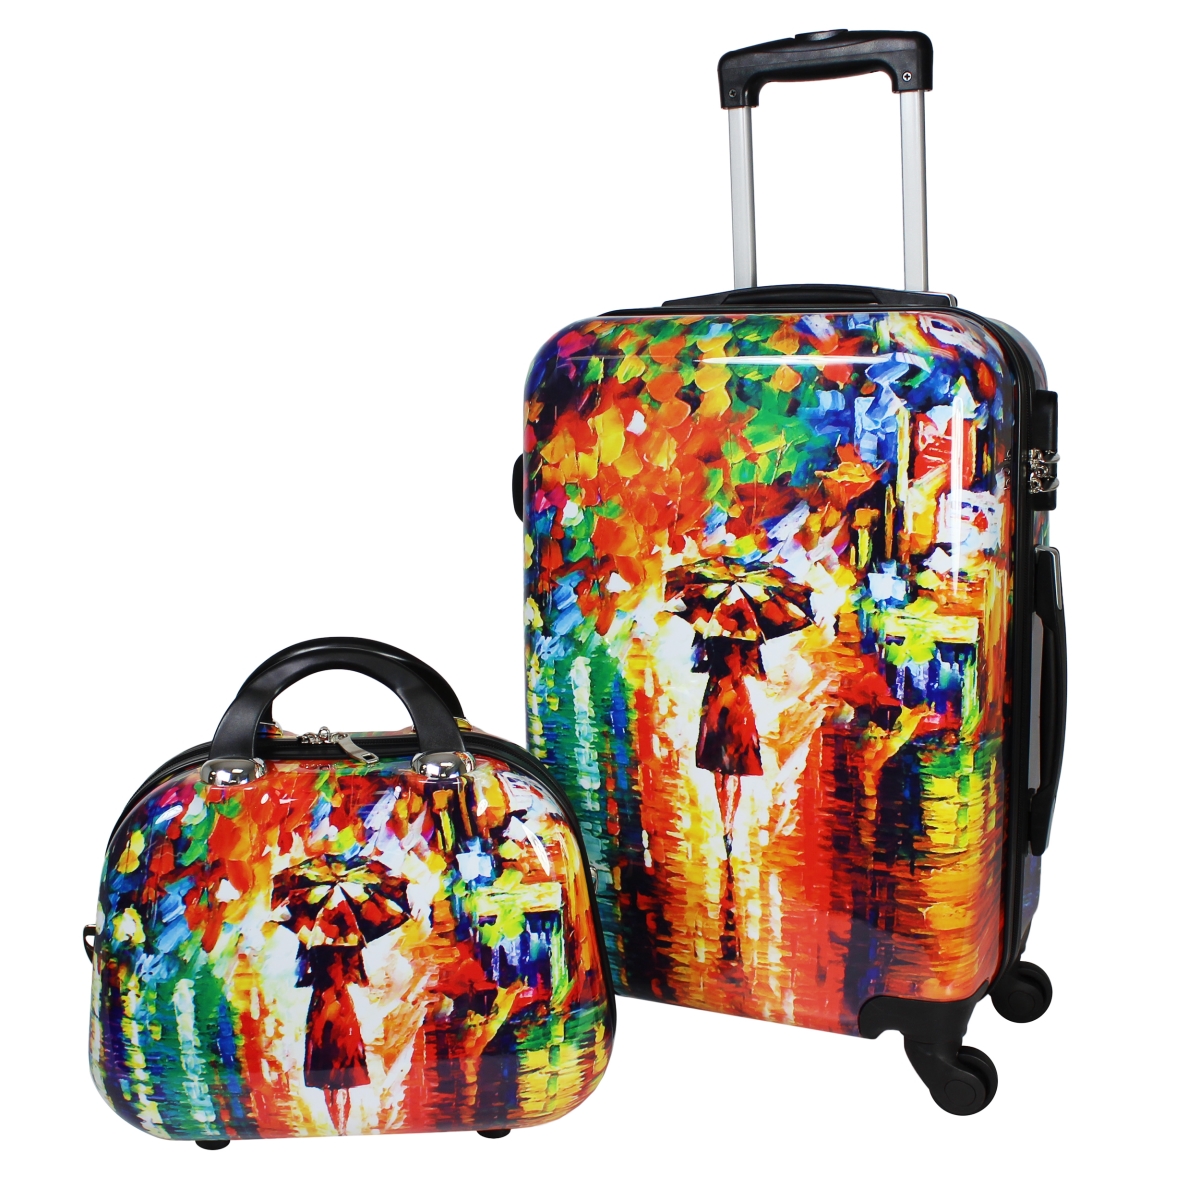 Picture of World Traveler WT260-2 Carry-On Hardside Spinner Luggage Set, Paris Nights - 2 Piece